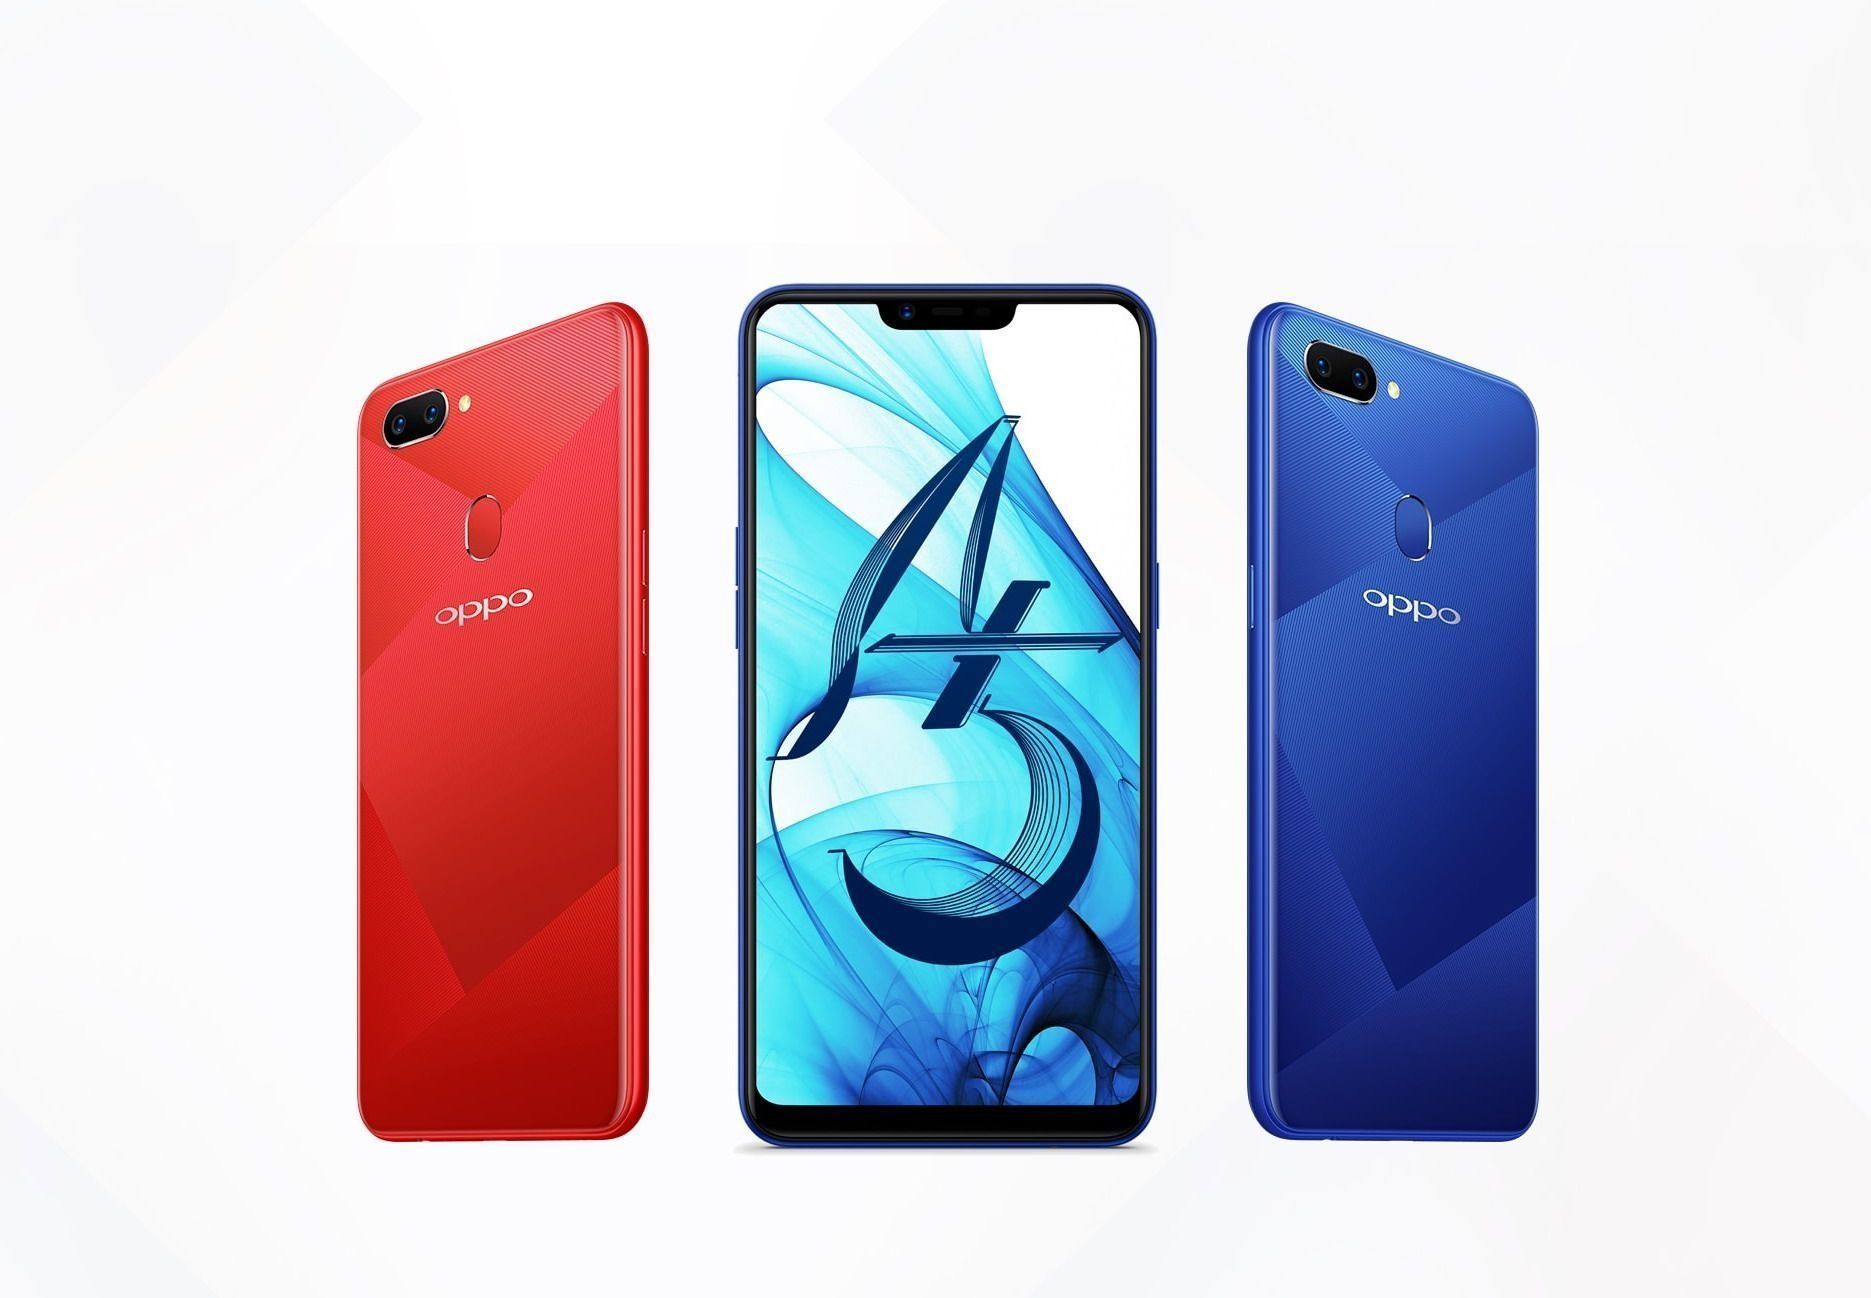 Smartphone Oppo A5 4/32 Gb - advantages and disadvantages